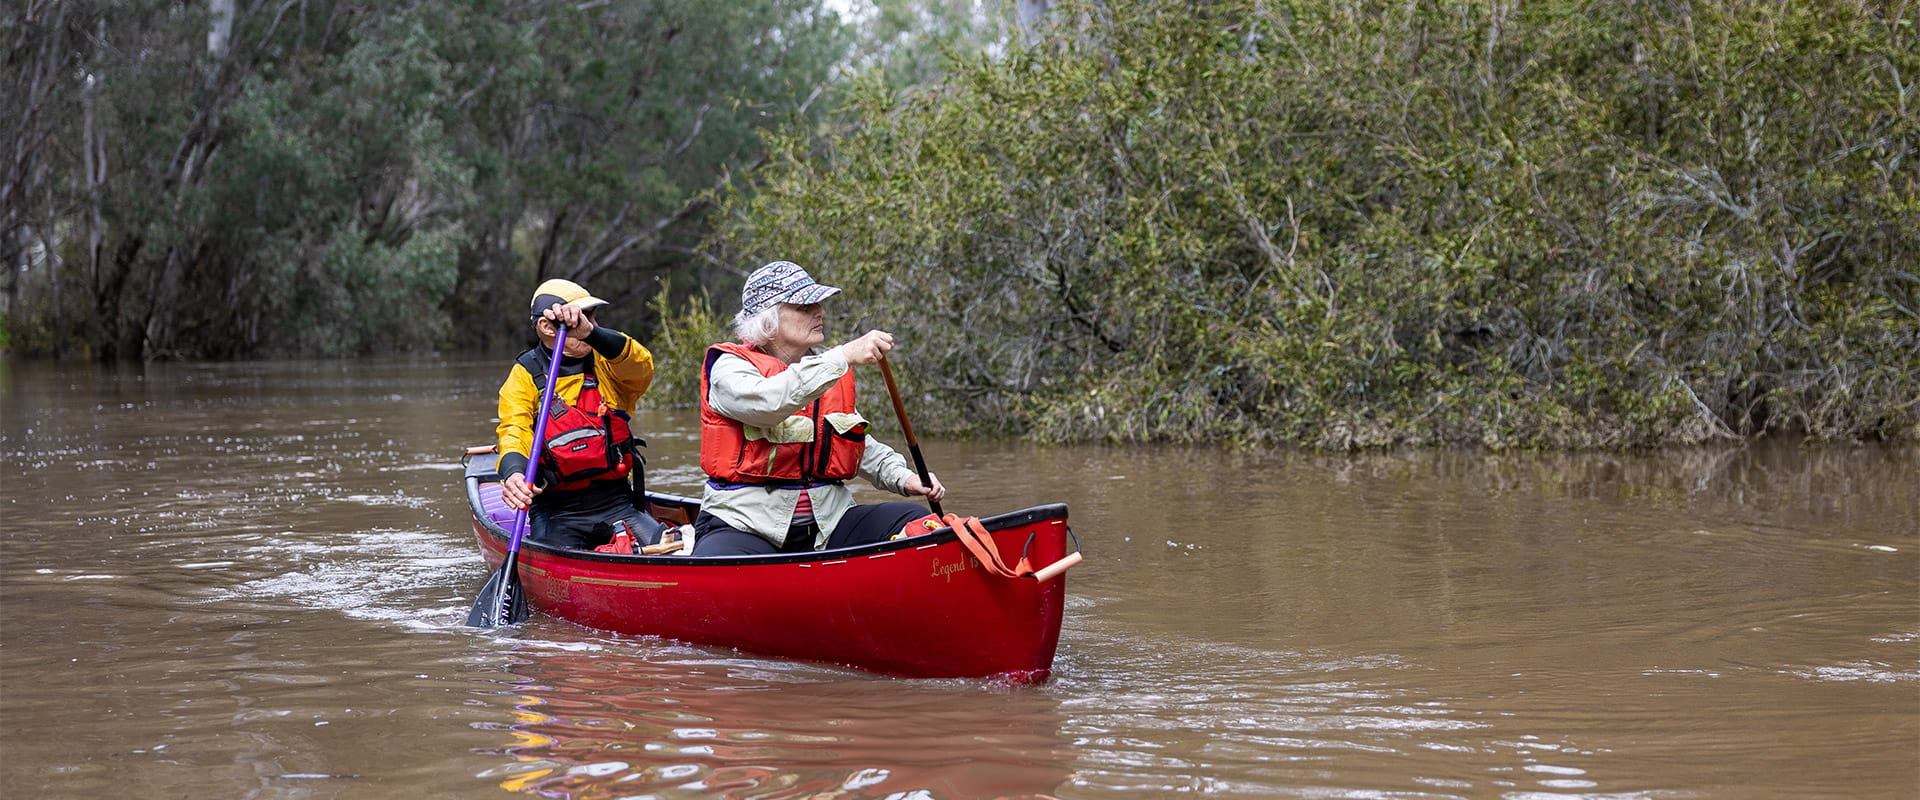 Two people in life-vests and a red canoe rowing along a river with vegetation on the banks in the background.